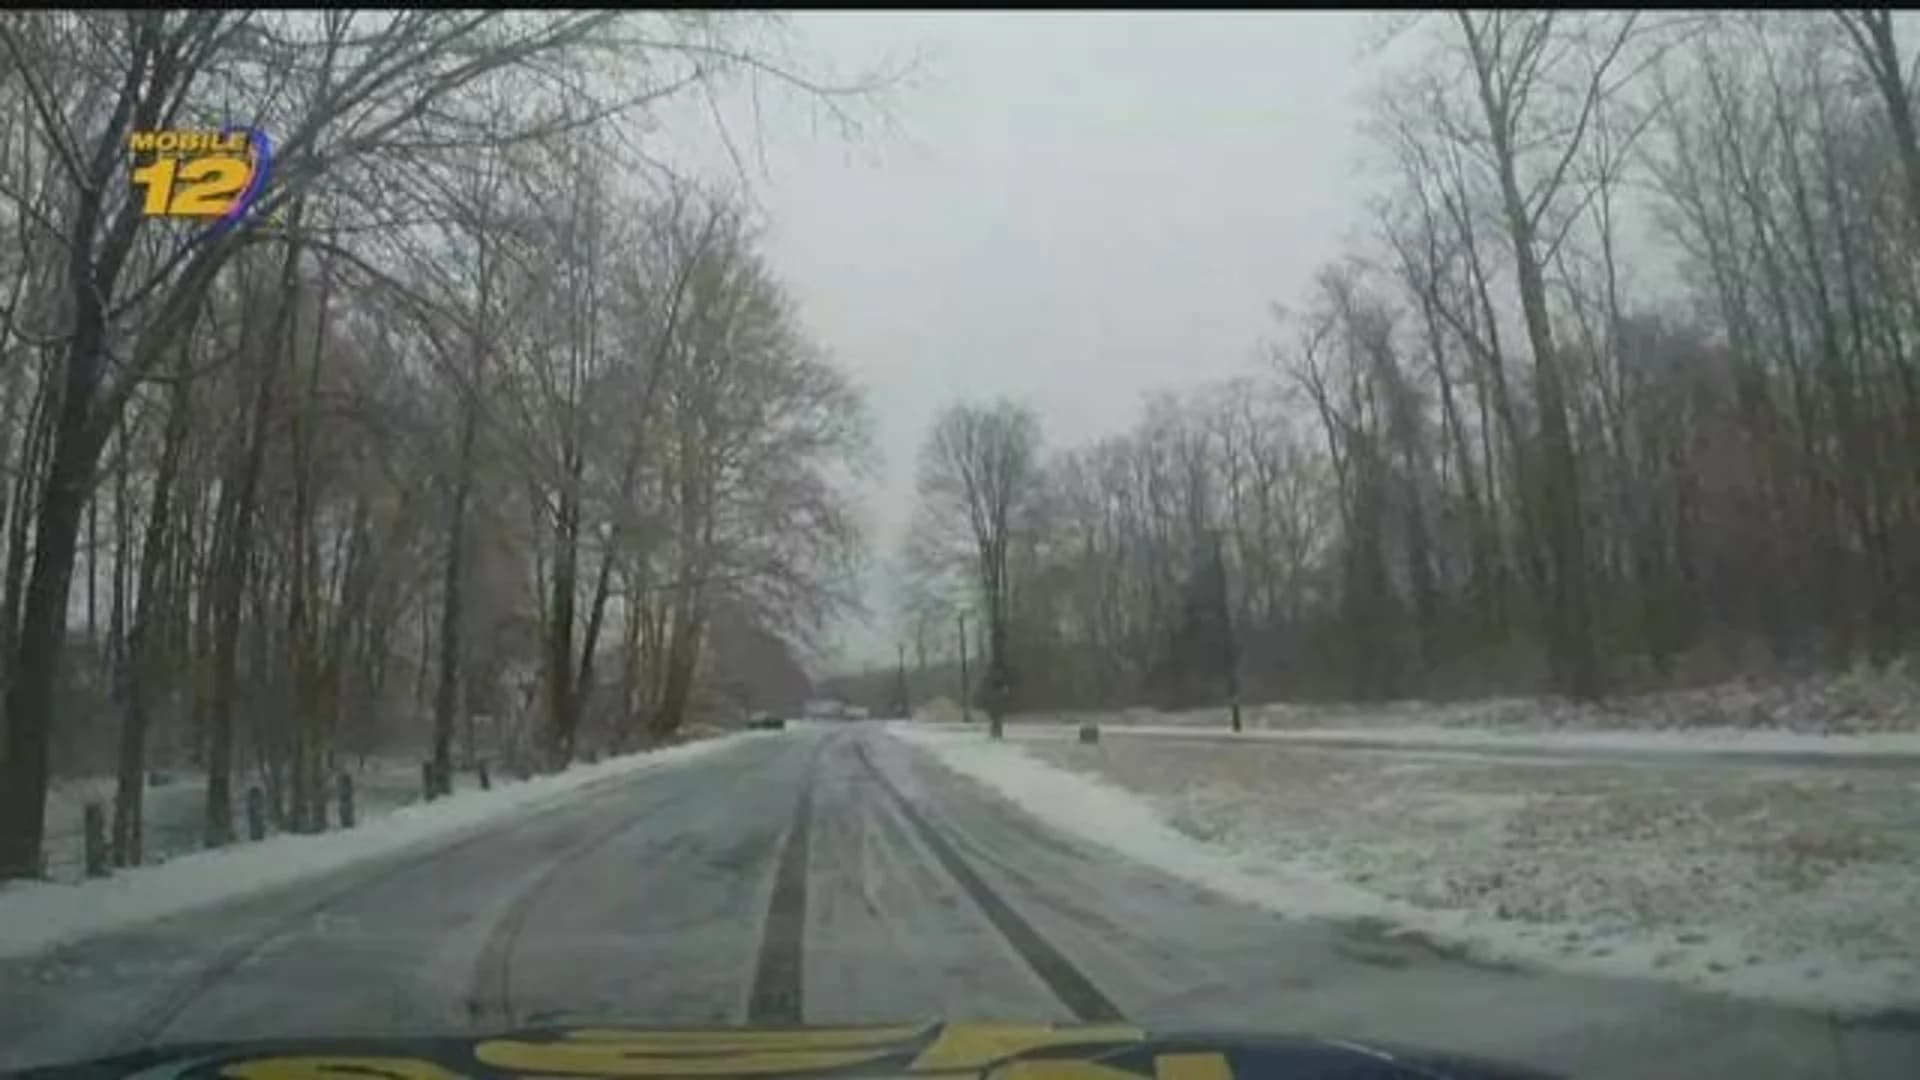 Mobile 12: Roads mostly clear after rain washes away snow